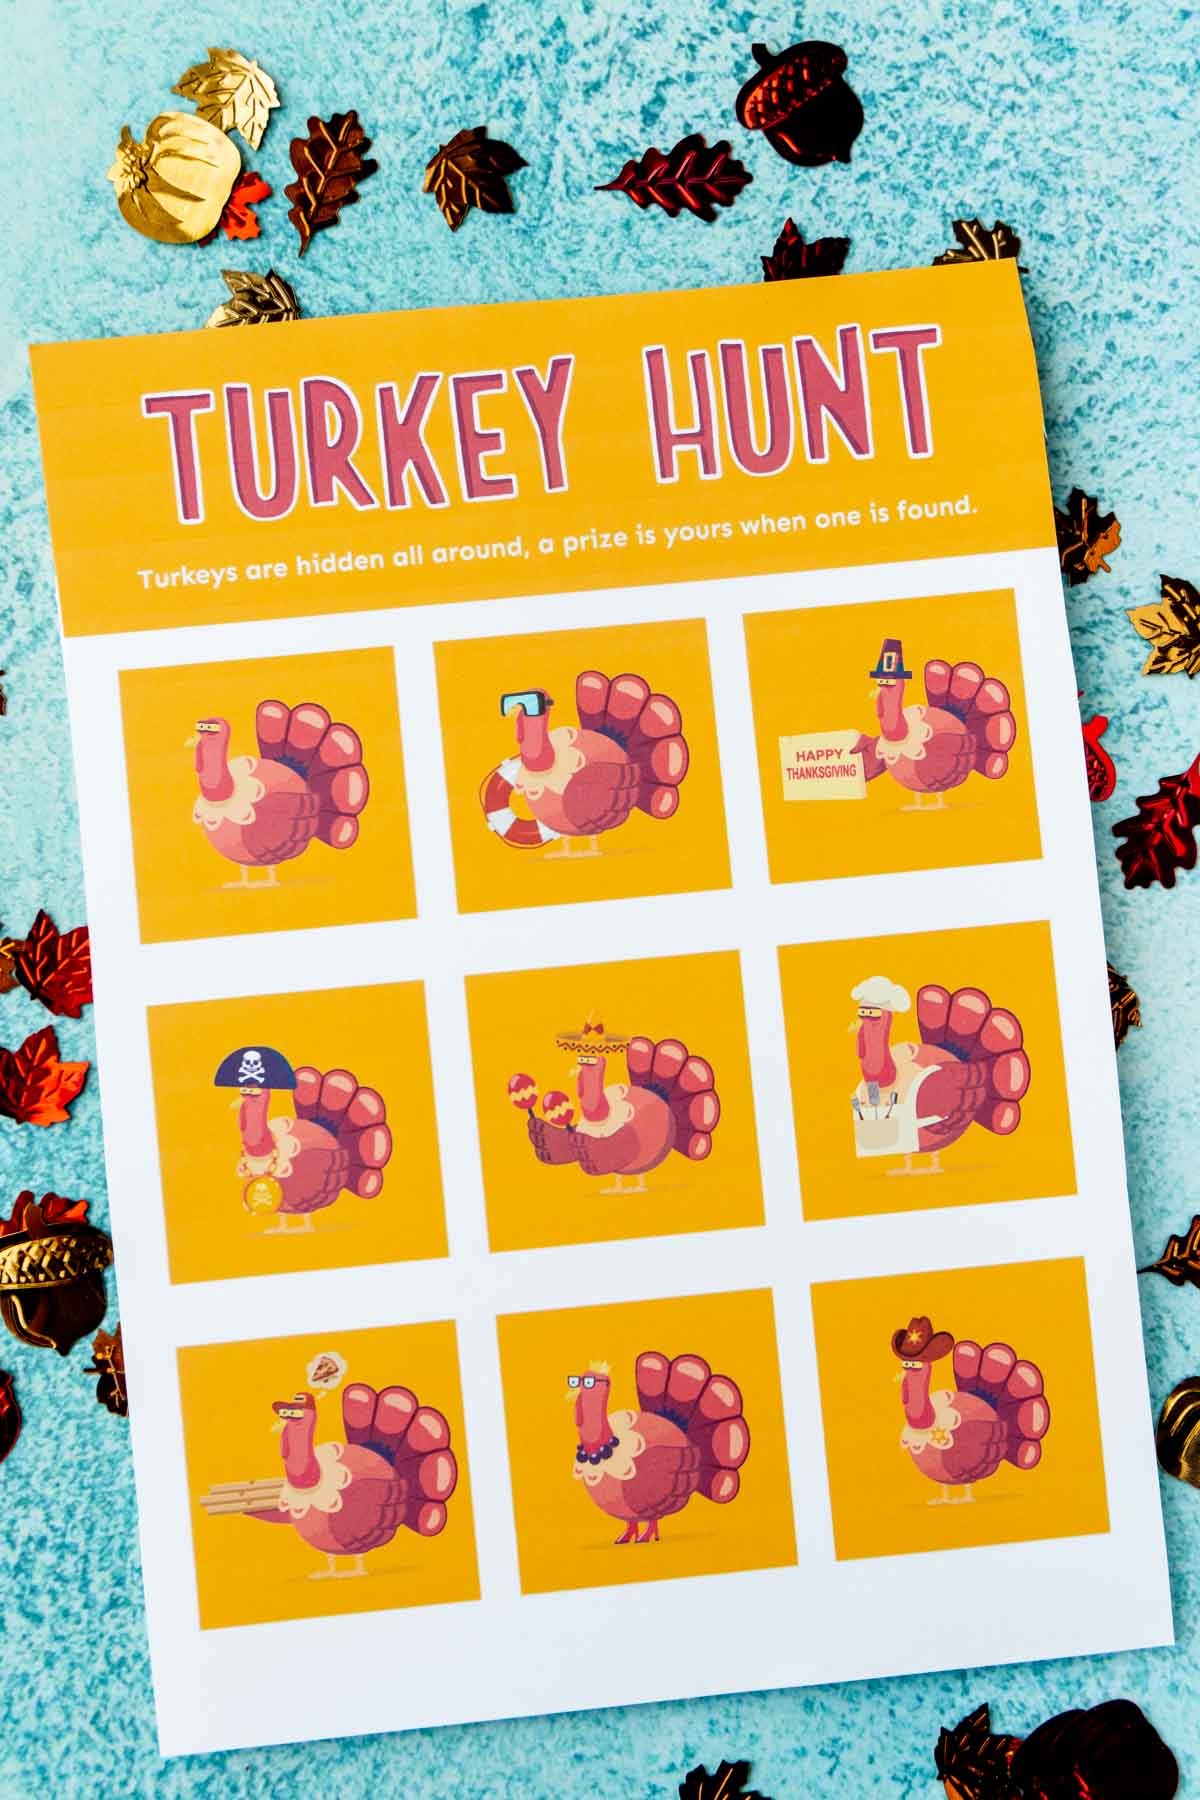 A printed out turkey hunt with turkey images on it